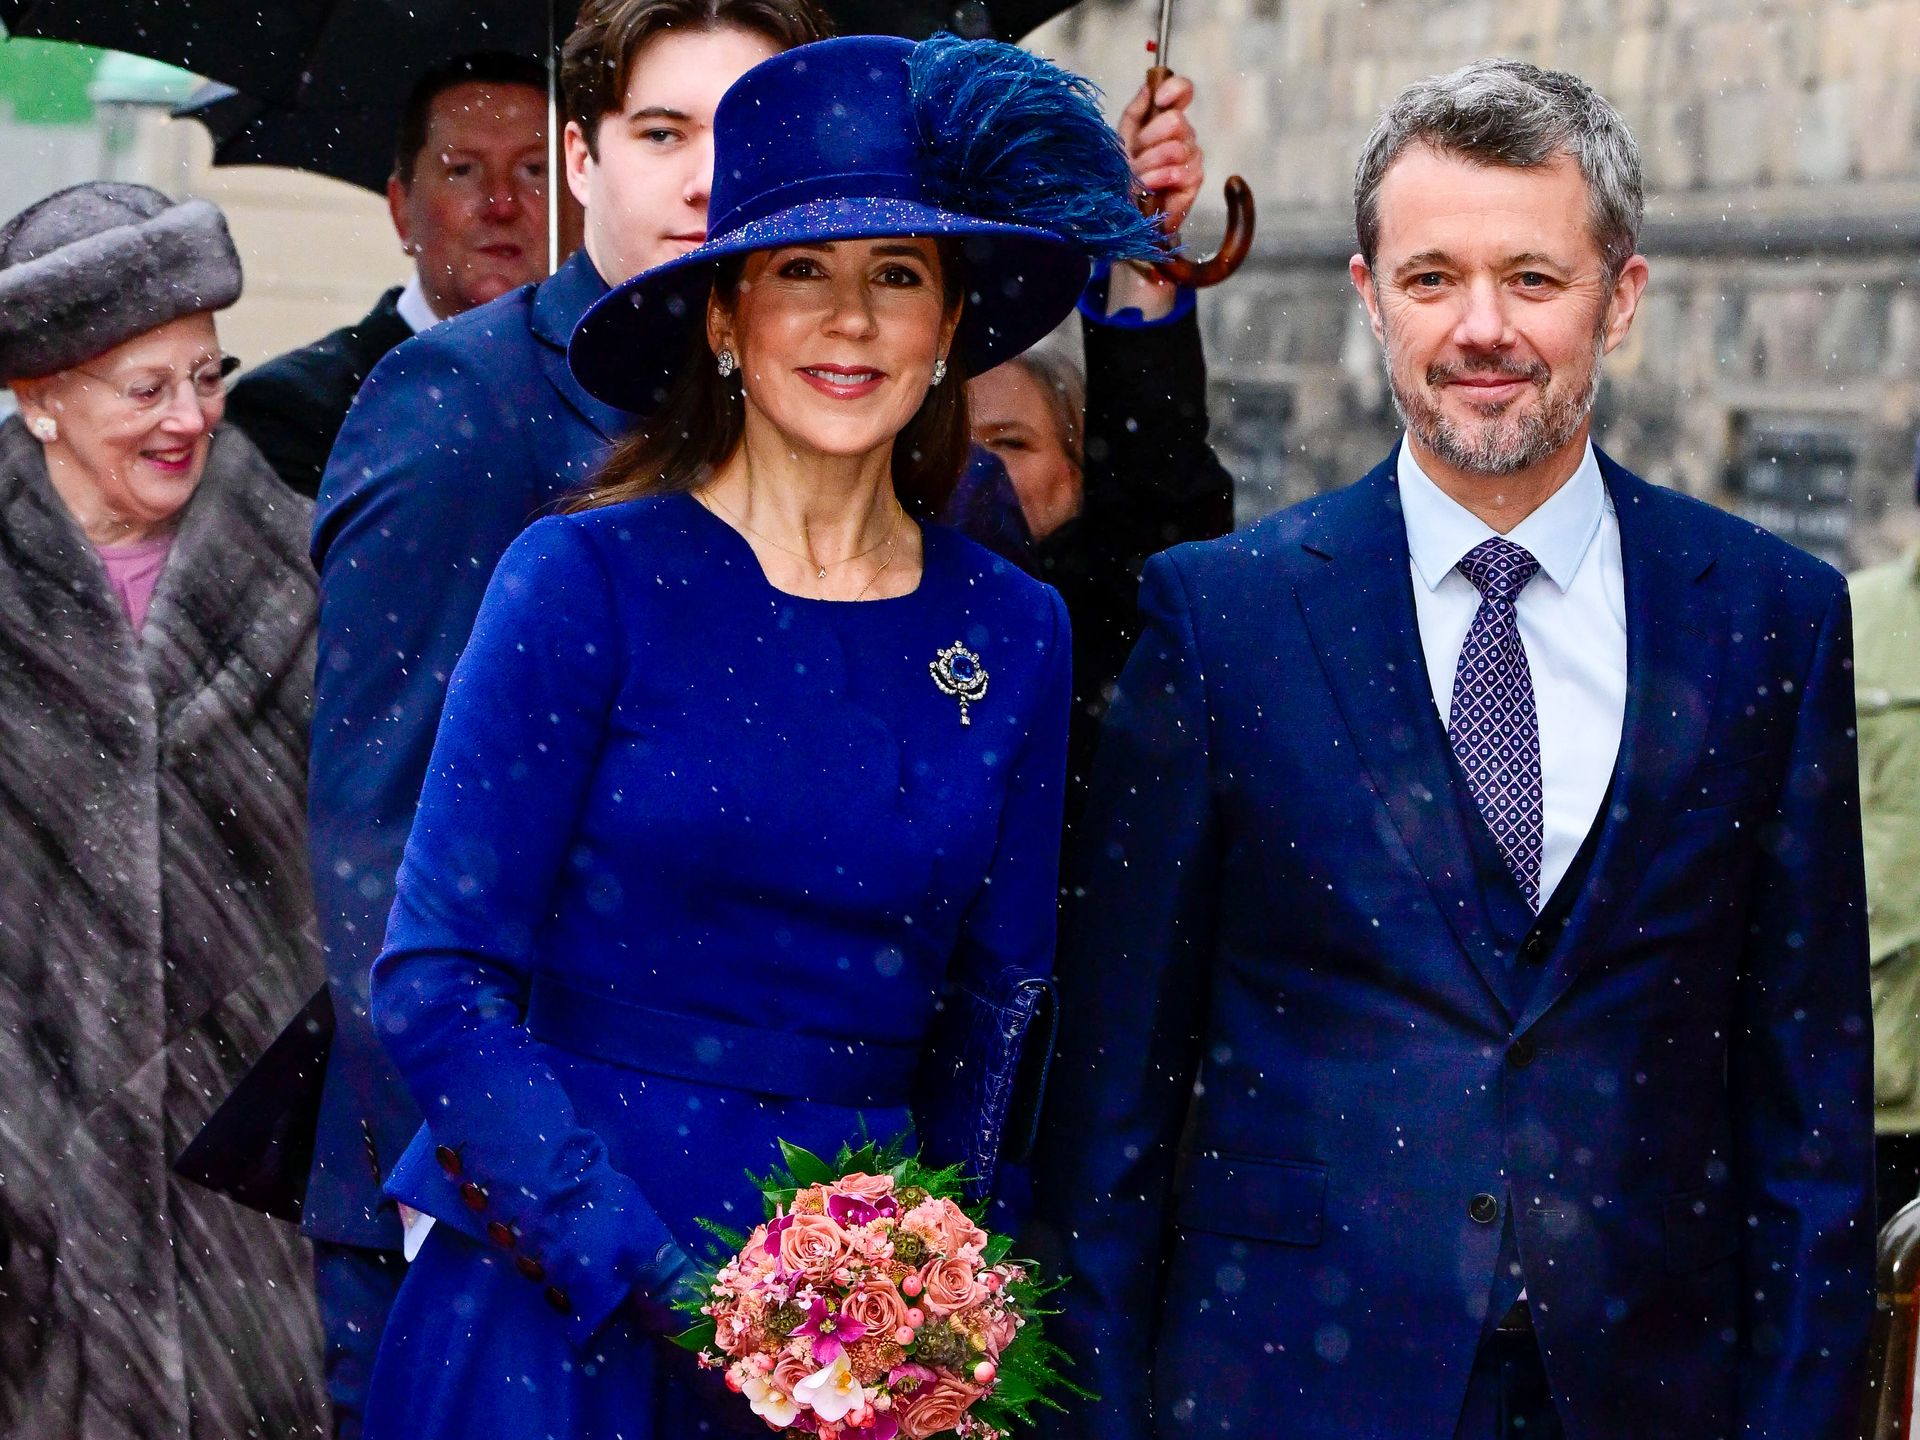 King Frederik and Queen Mary make first appearance since accession